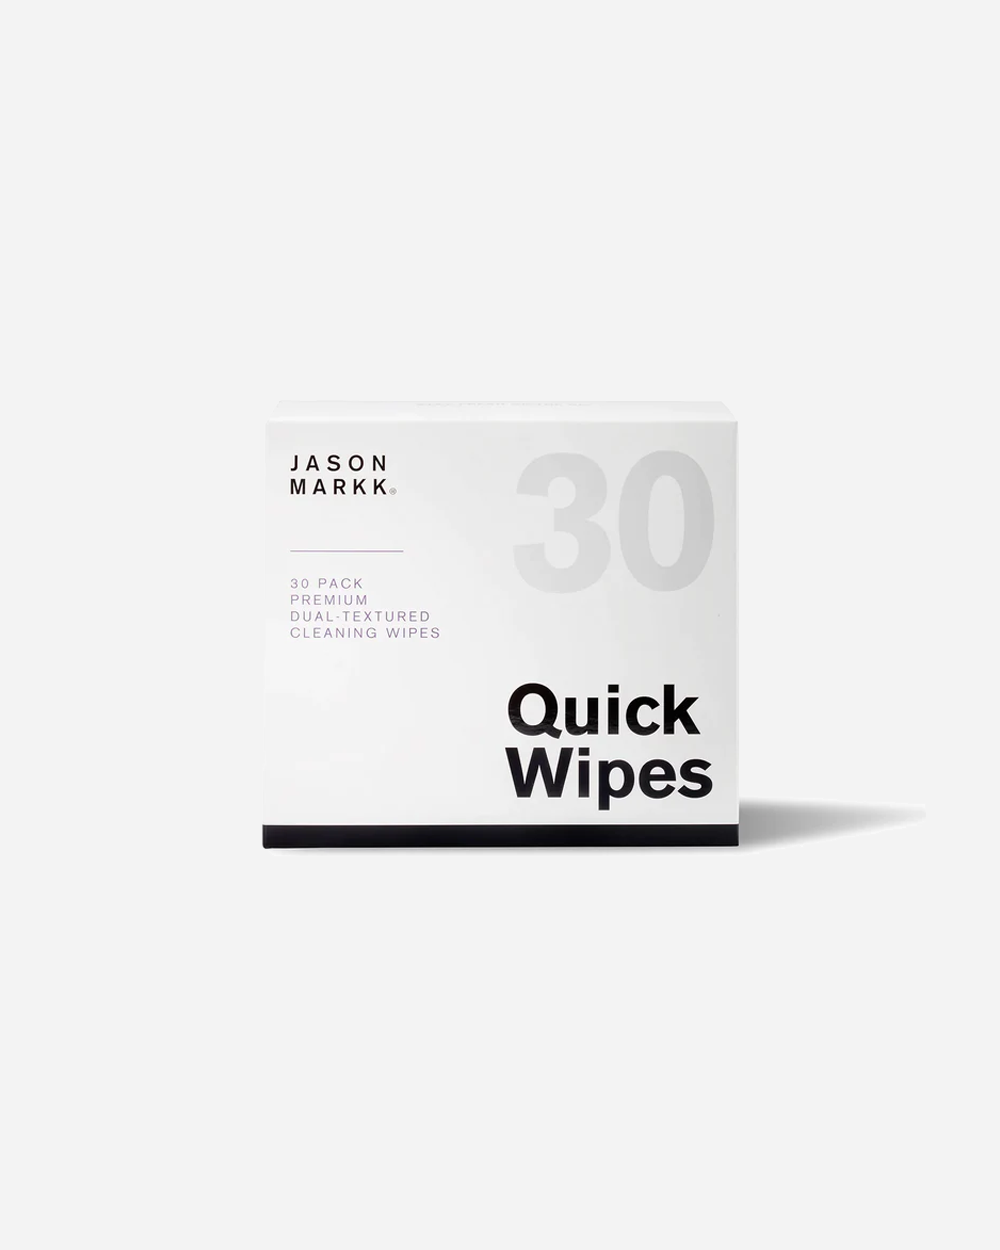 Quick Wipes 30 Pack